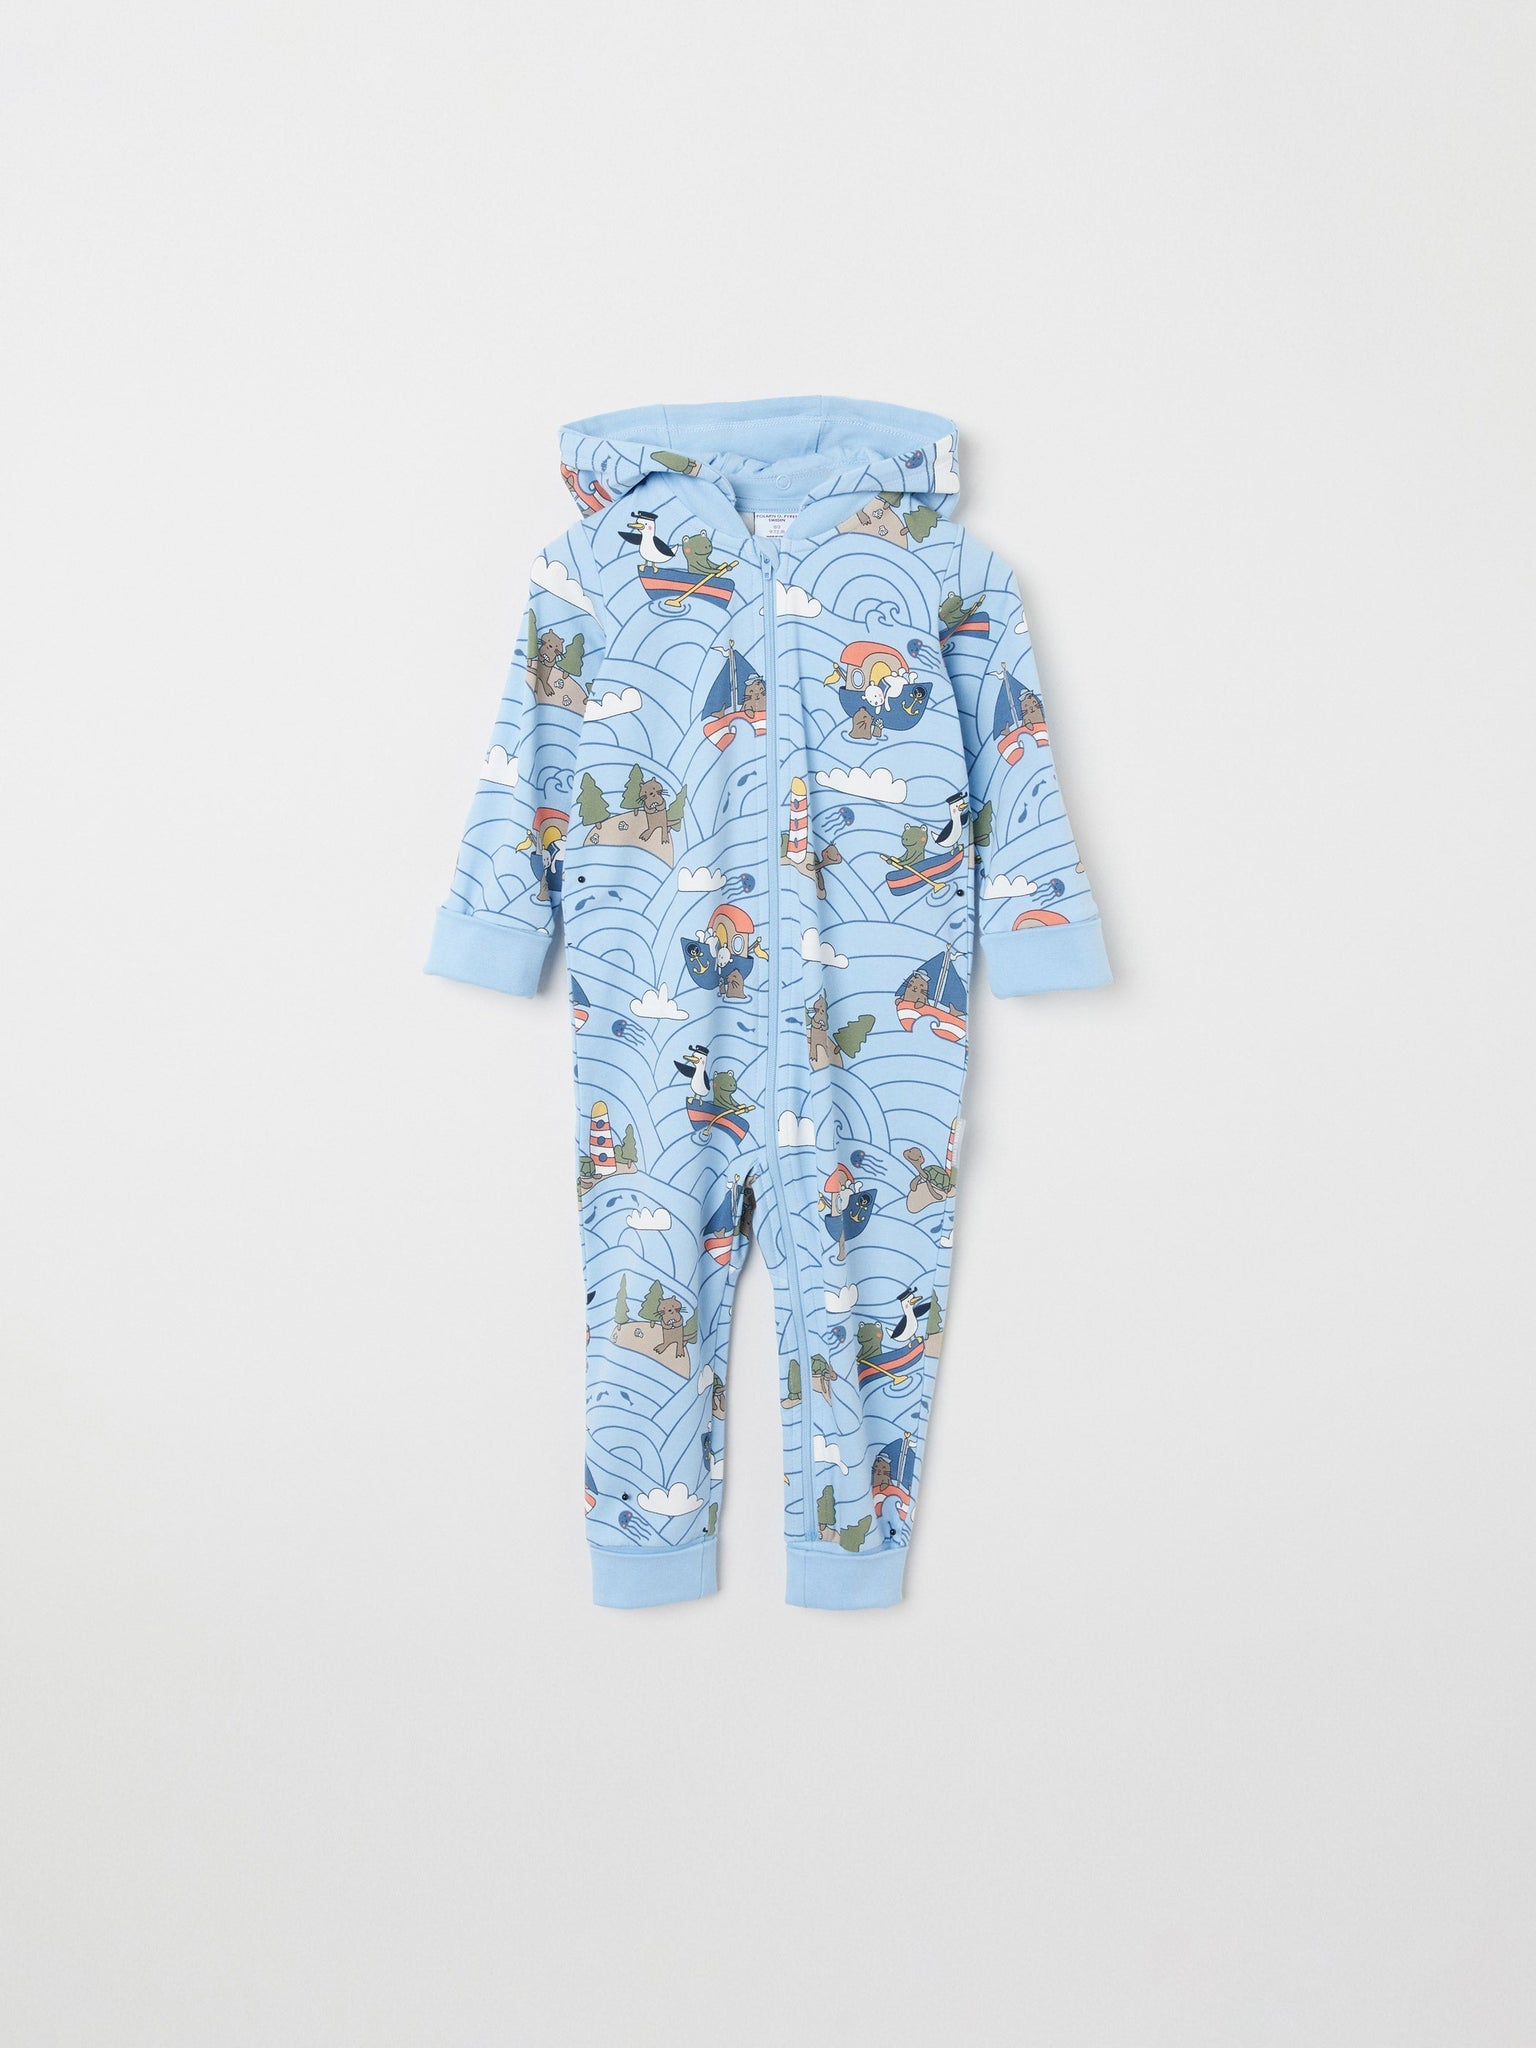 Sea Print Baby All-in-one